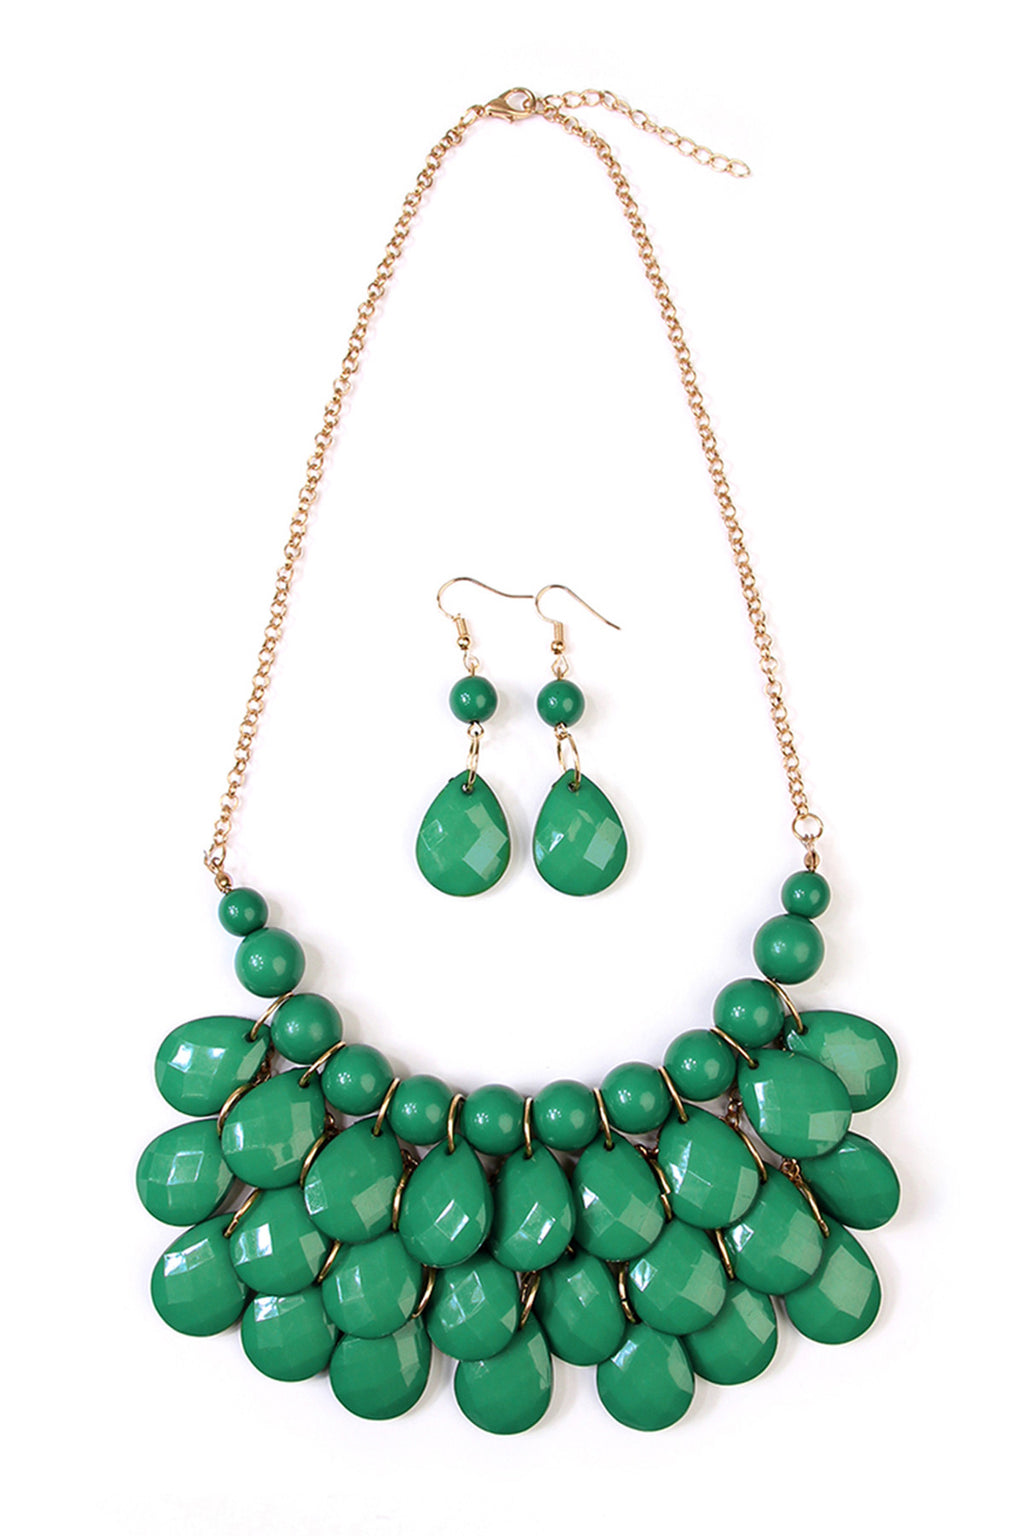 Green Teardrop Bubble Bib Necklace and Earring Set - Pack of 6